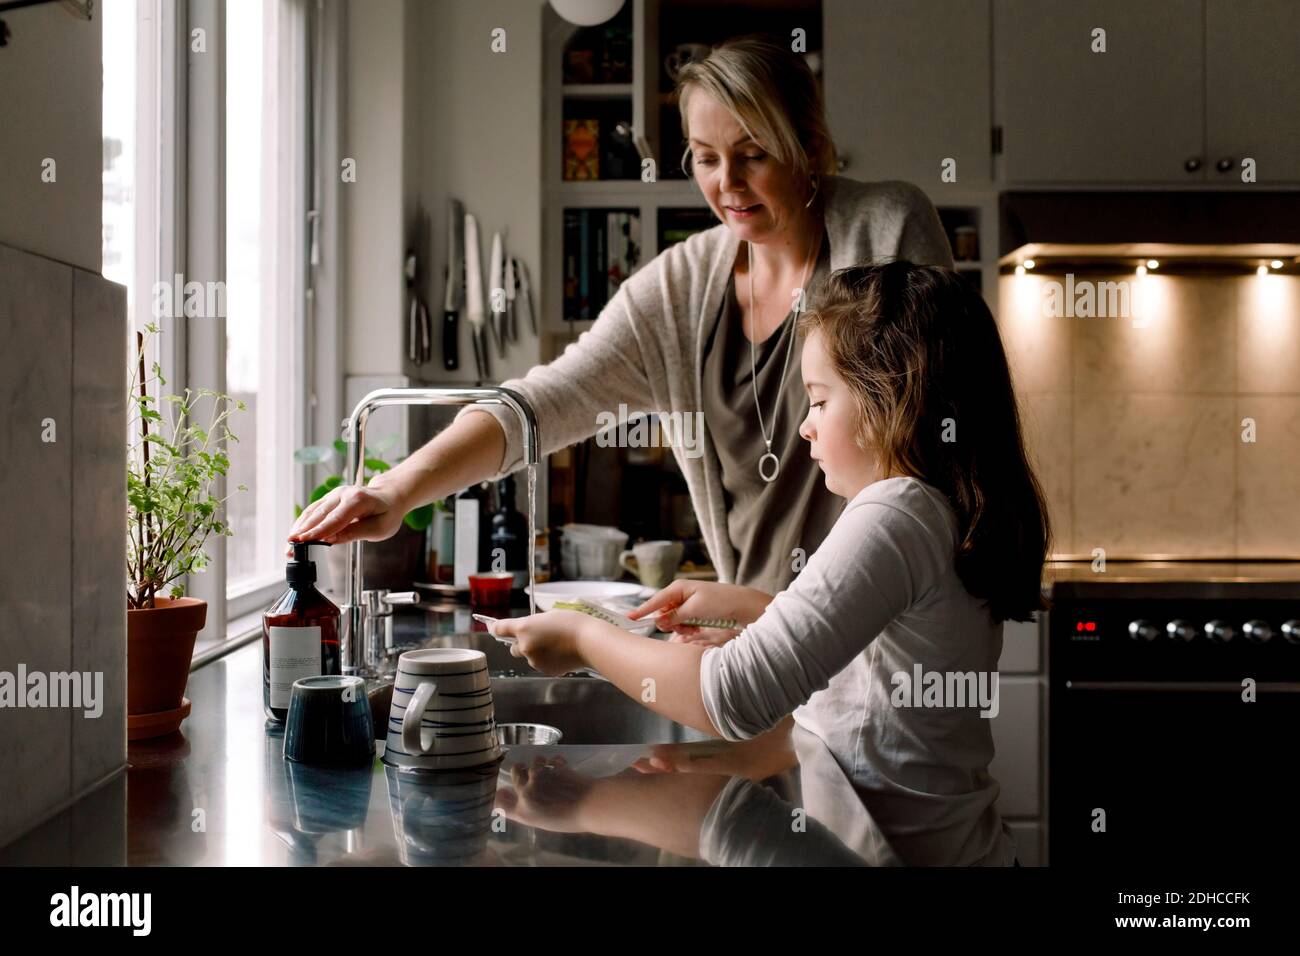 https://c8.alamy.com/comp/2DHCCFK/daughter-washing-dishes-while-standing-by-mother-in-kitchen-at-home-2DHCCFK.jpg